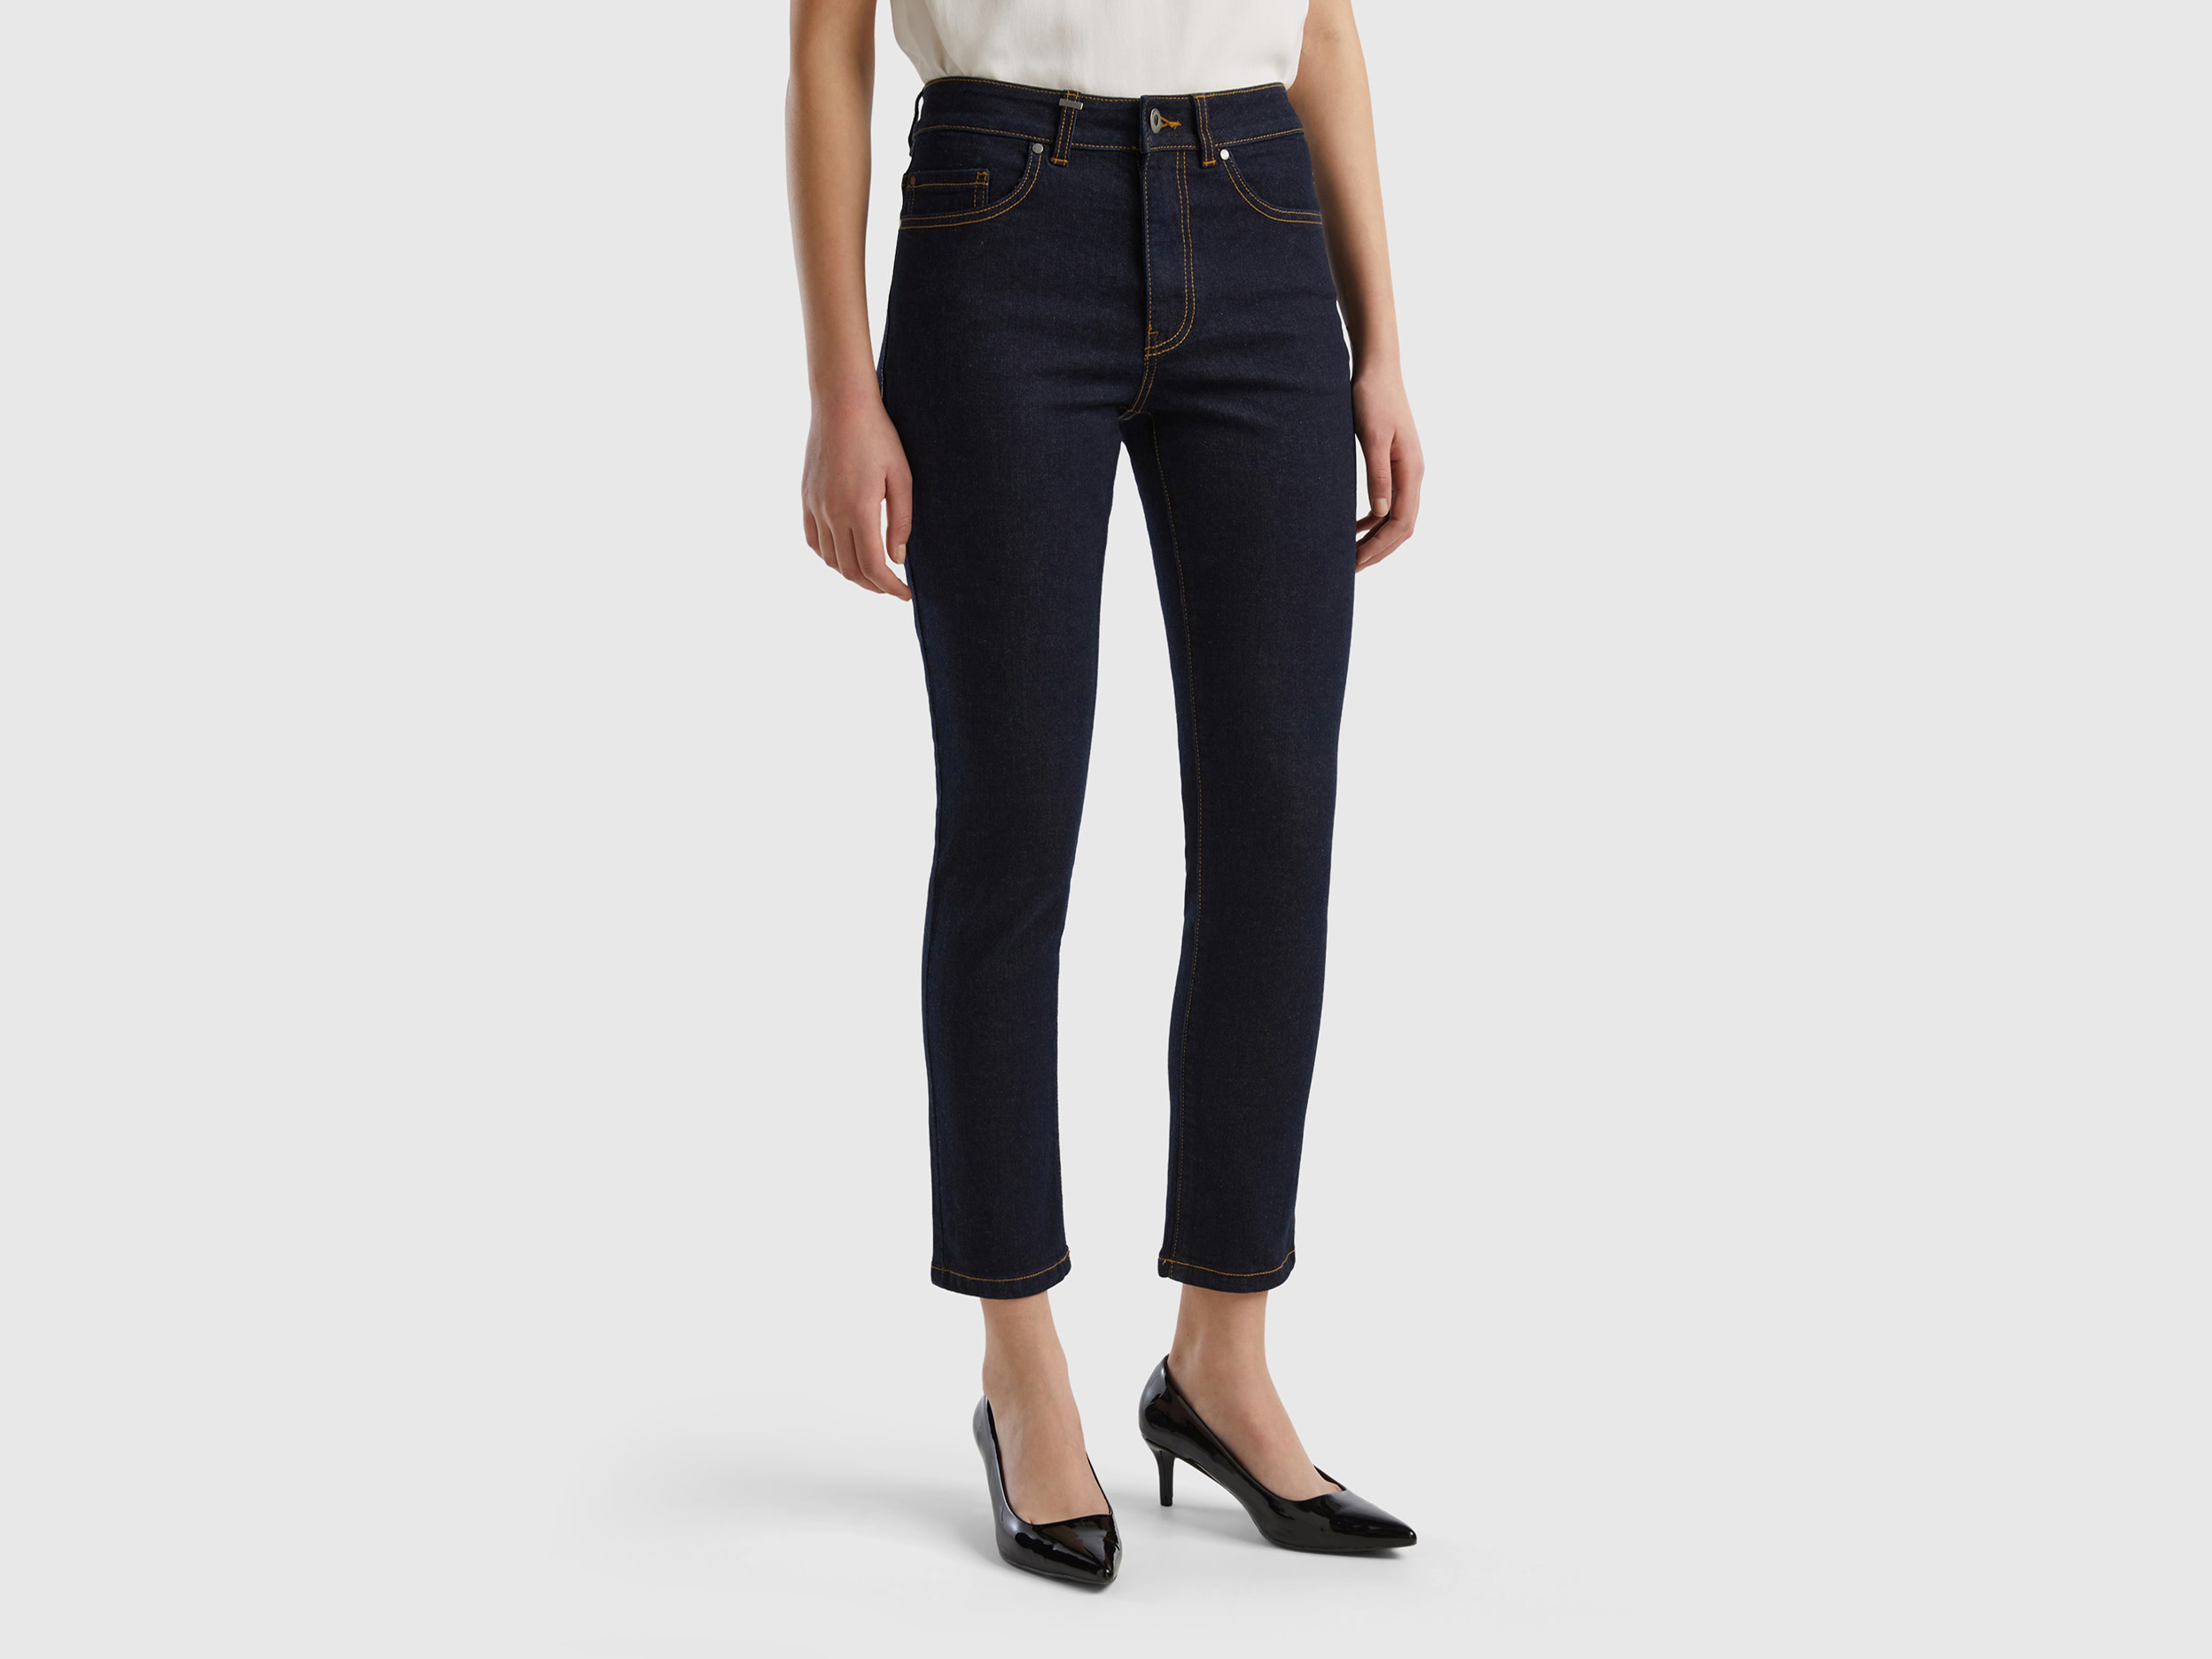 Image of Benetton, Slim Fit High-waisted Jeans, size 31, Dark Blue, Women